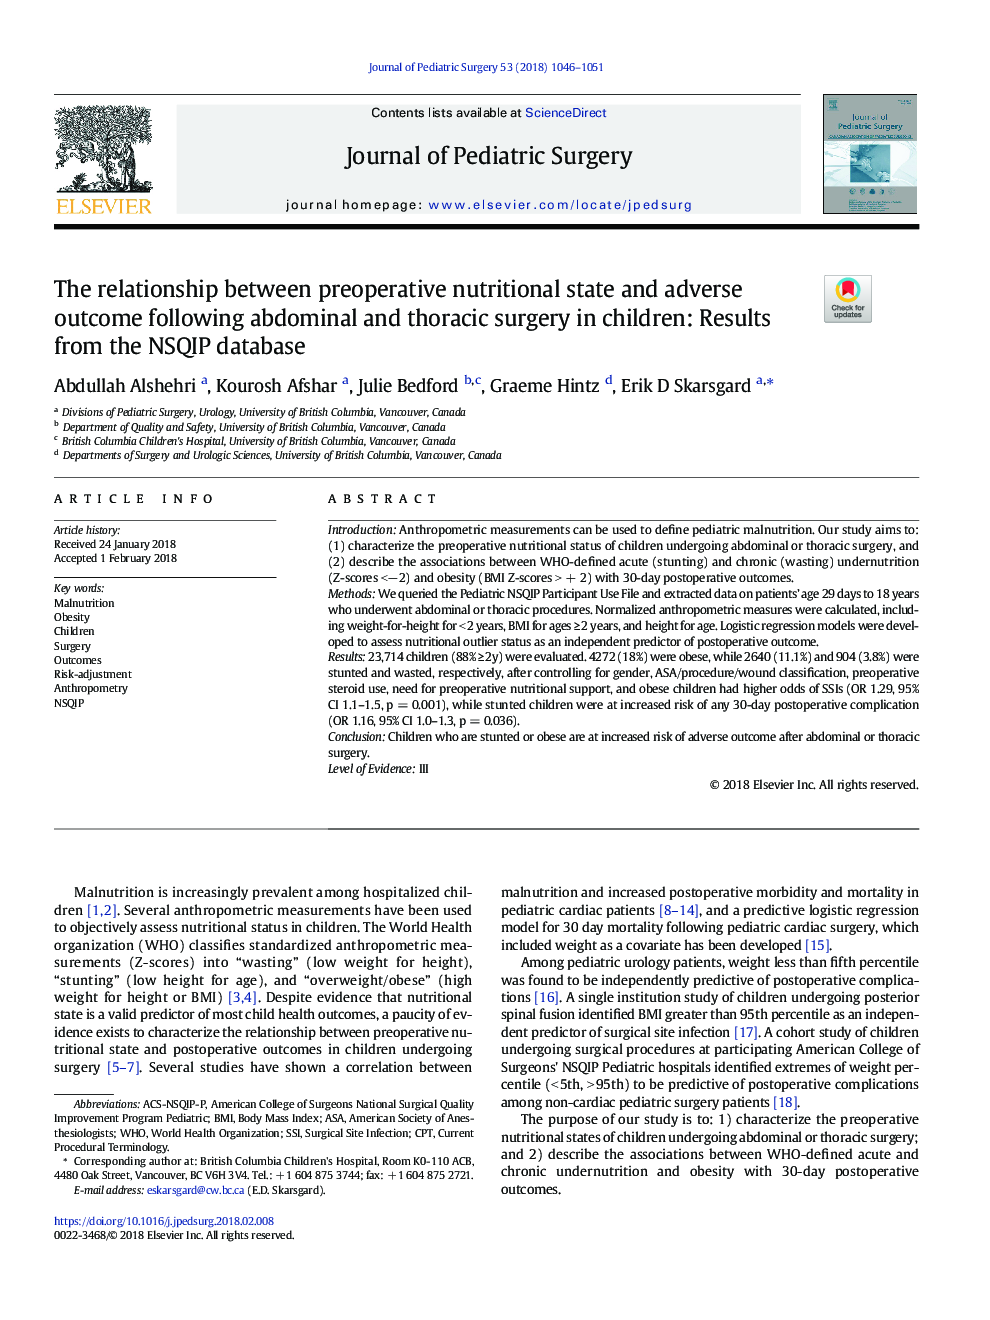 The relationship between preoperative nutritional state and adverse outcome following abdominal and thoracic surgery in children: Results from the NSQIP database